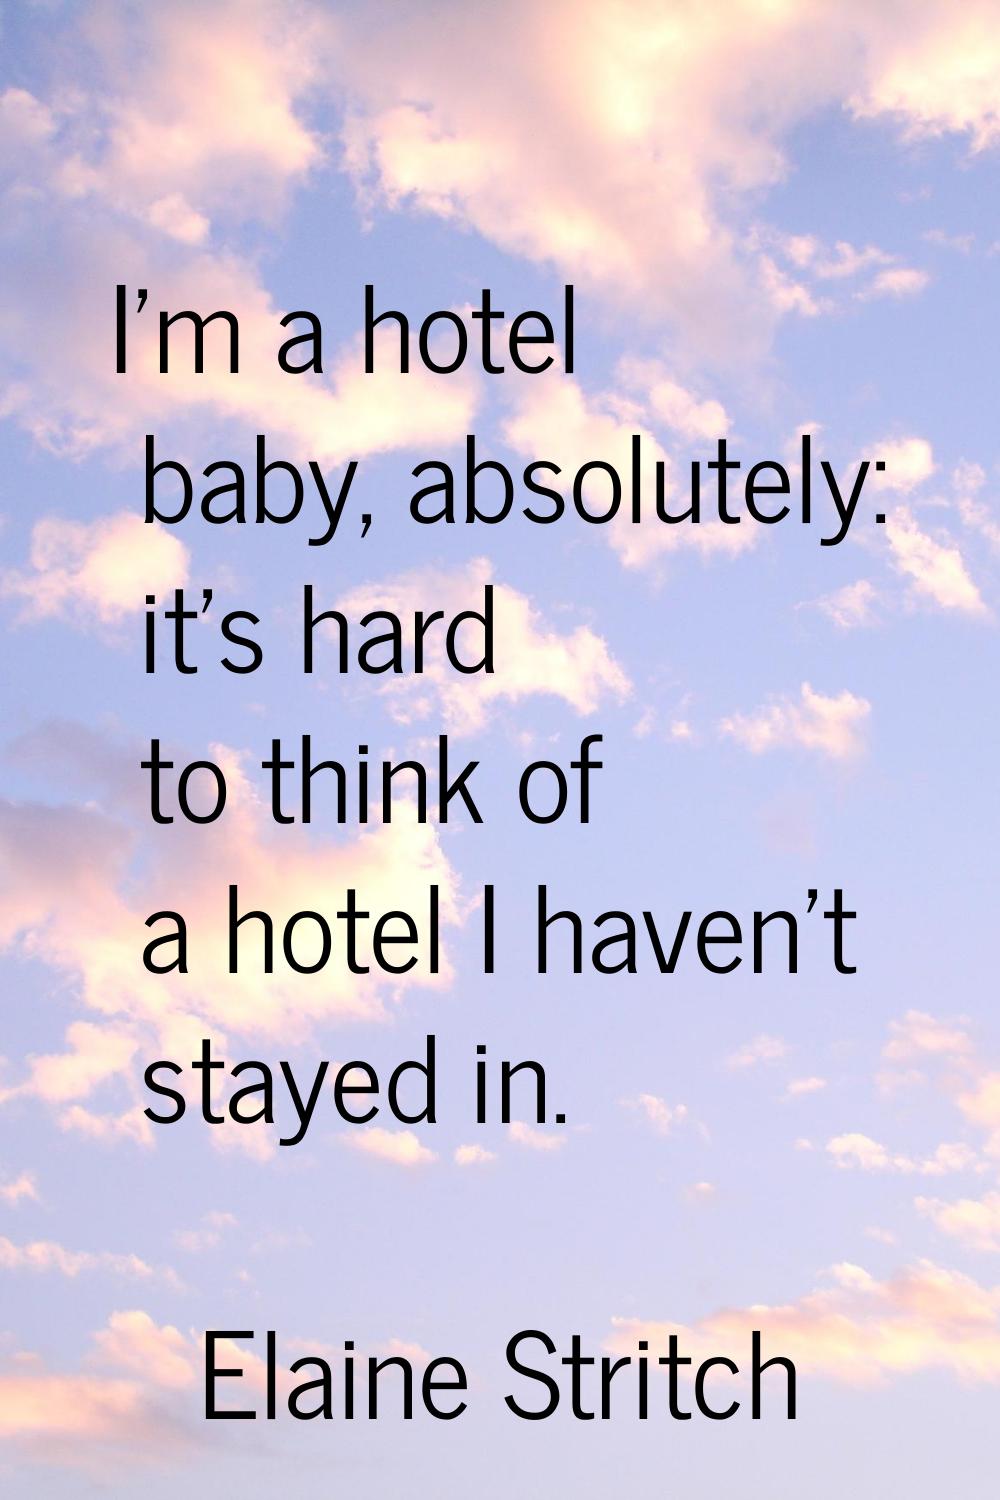 I'm a hotel baby, absolutely: it's hard to think of a hotel I haven't stayed in.